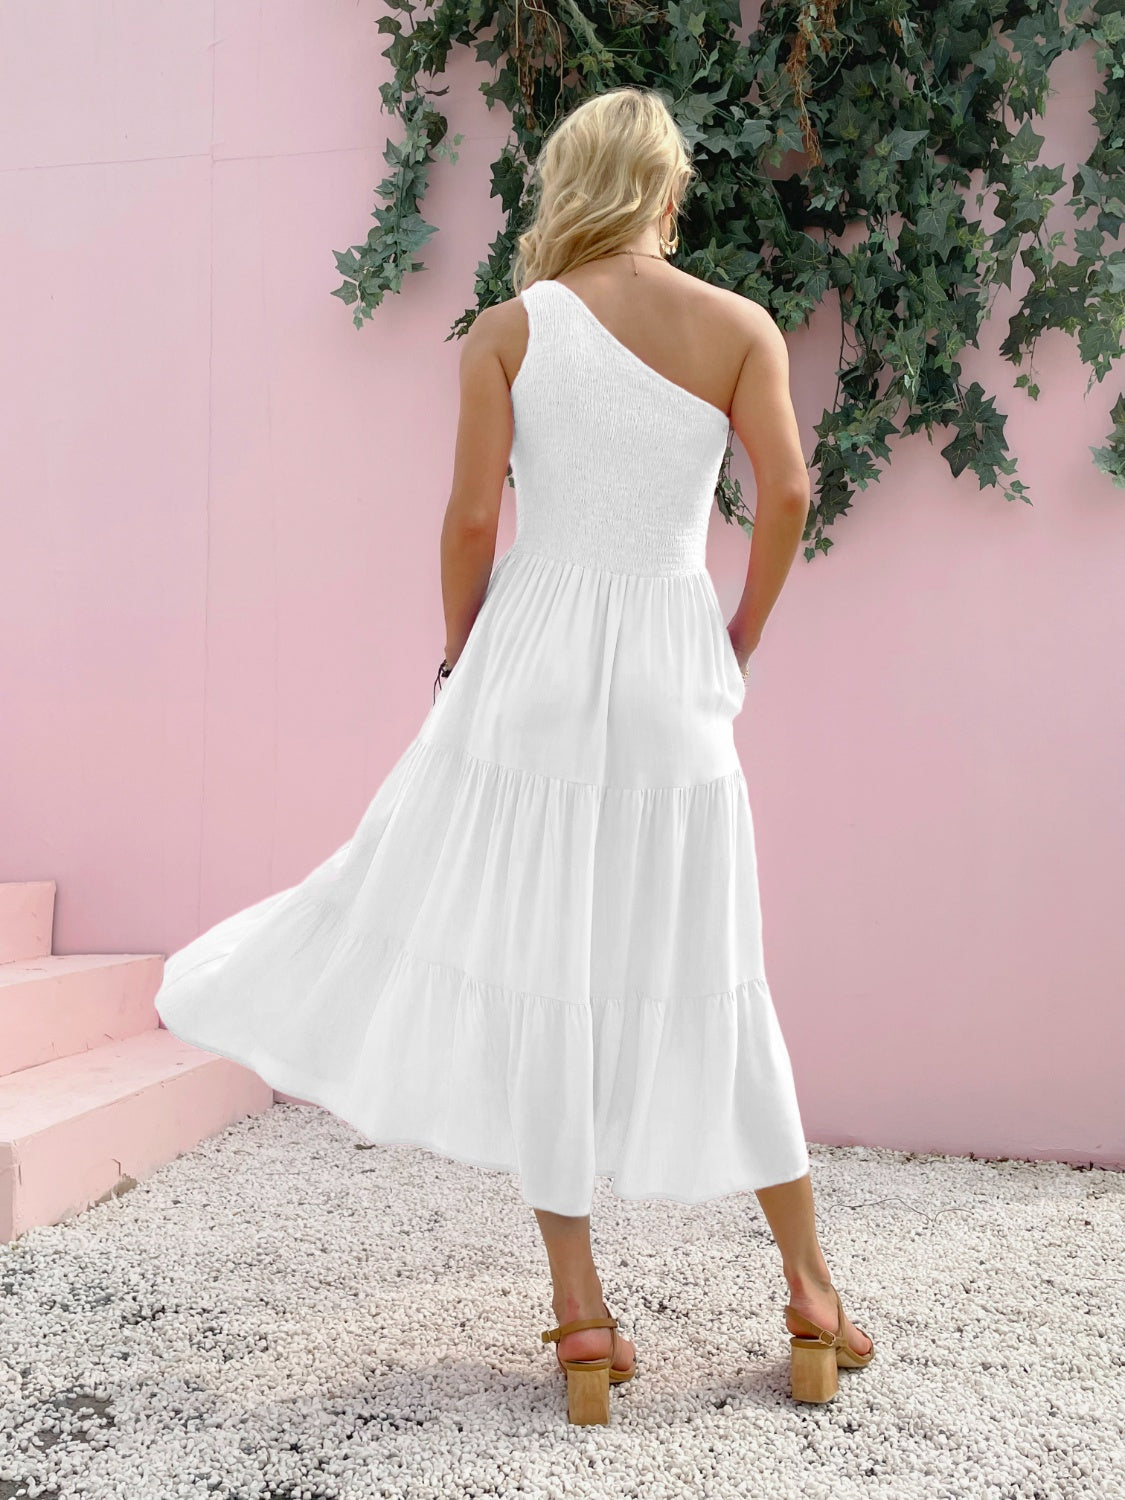 Discover the chic Smocked Single Shoulder Dress! Perfect for any occasion, available in 5 colors. Your go-to for effortless style and comfort.